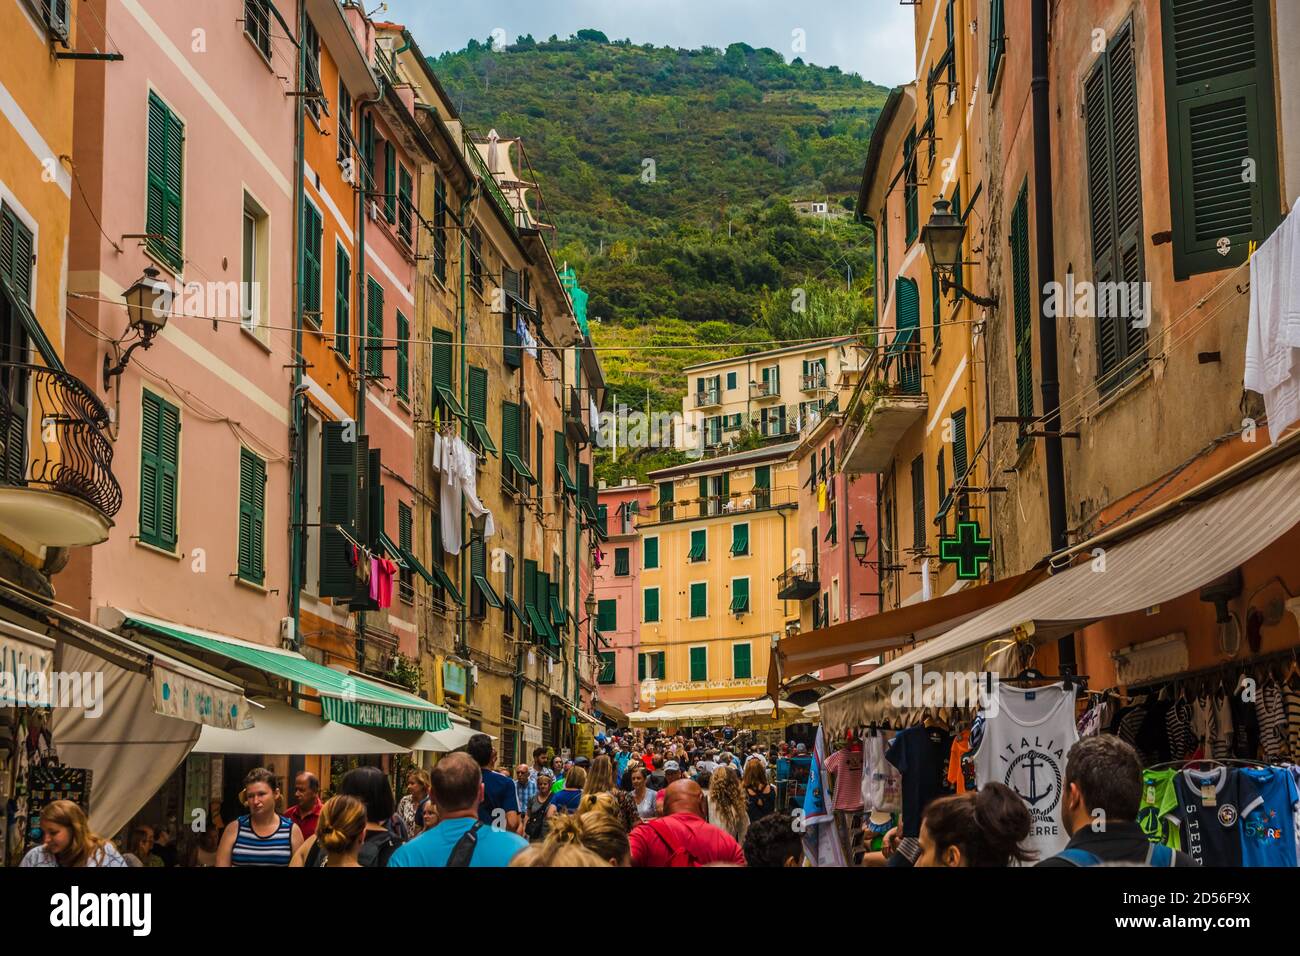 Lovely street view of Vernazza's main street, Via Roma in the Cinque Terre coastal area. The busy street with colourful houses, shops and restaurants... Stock Photo